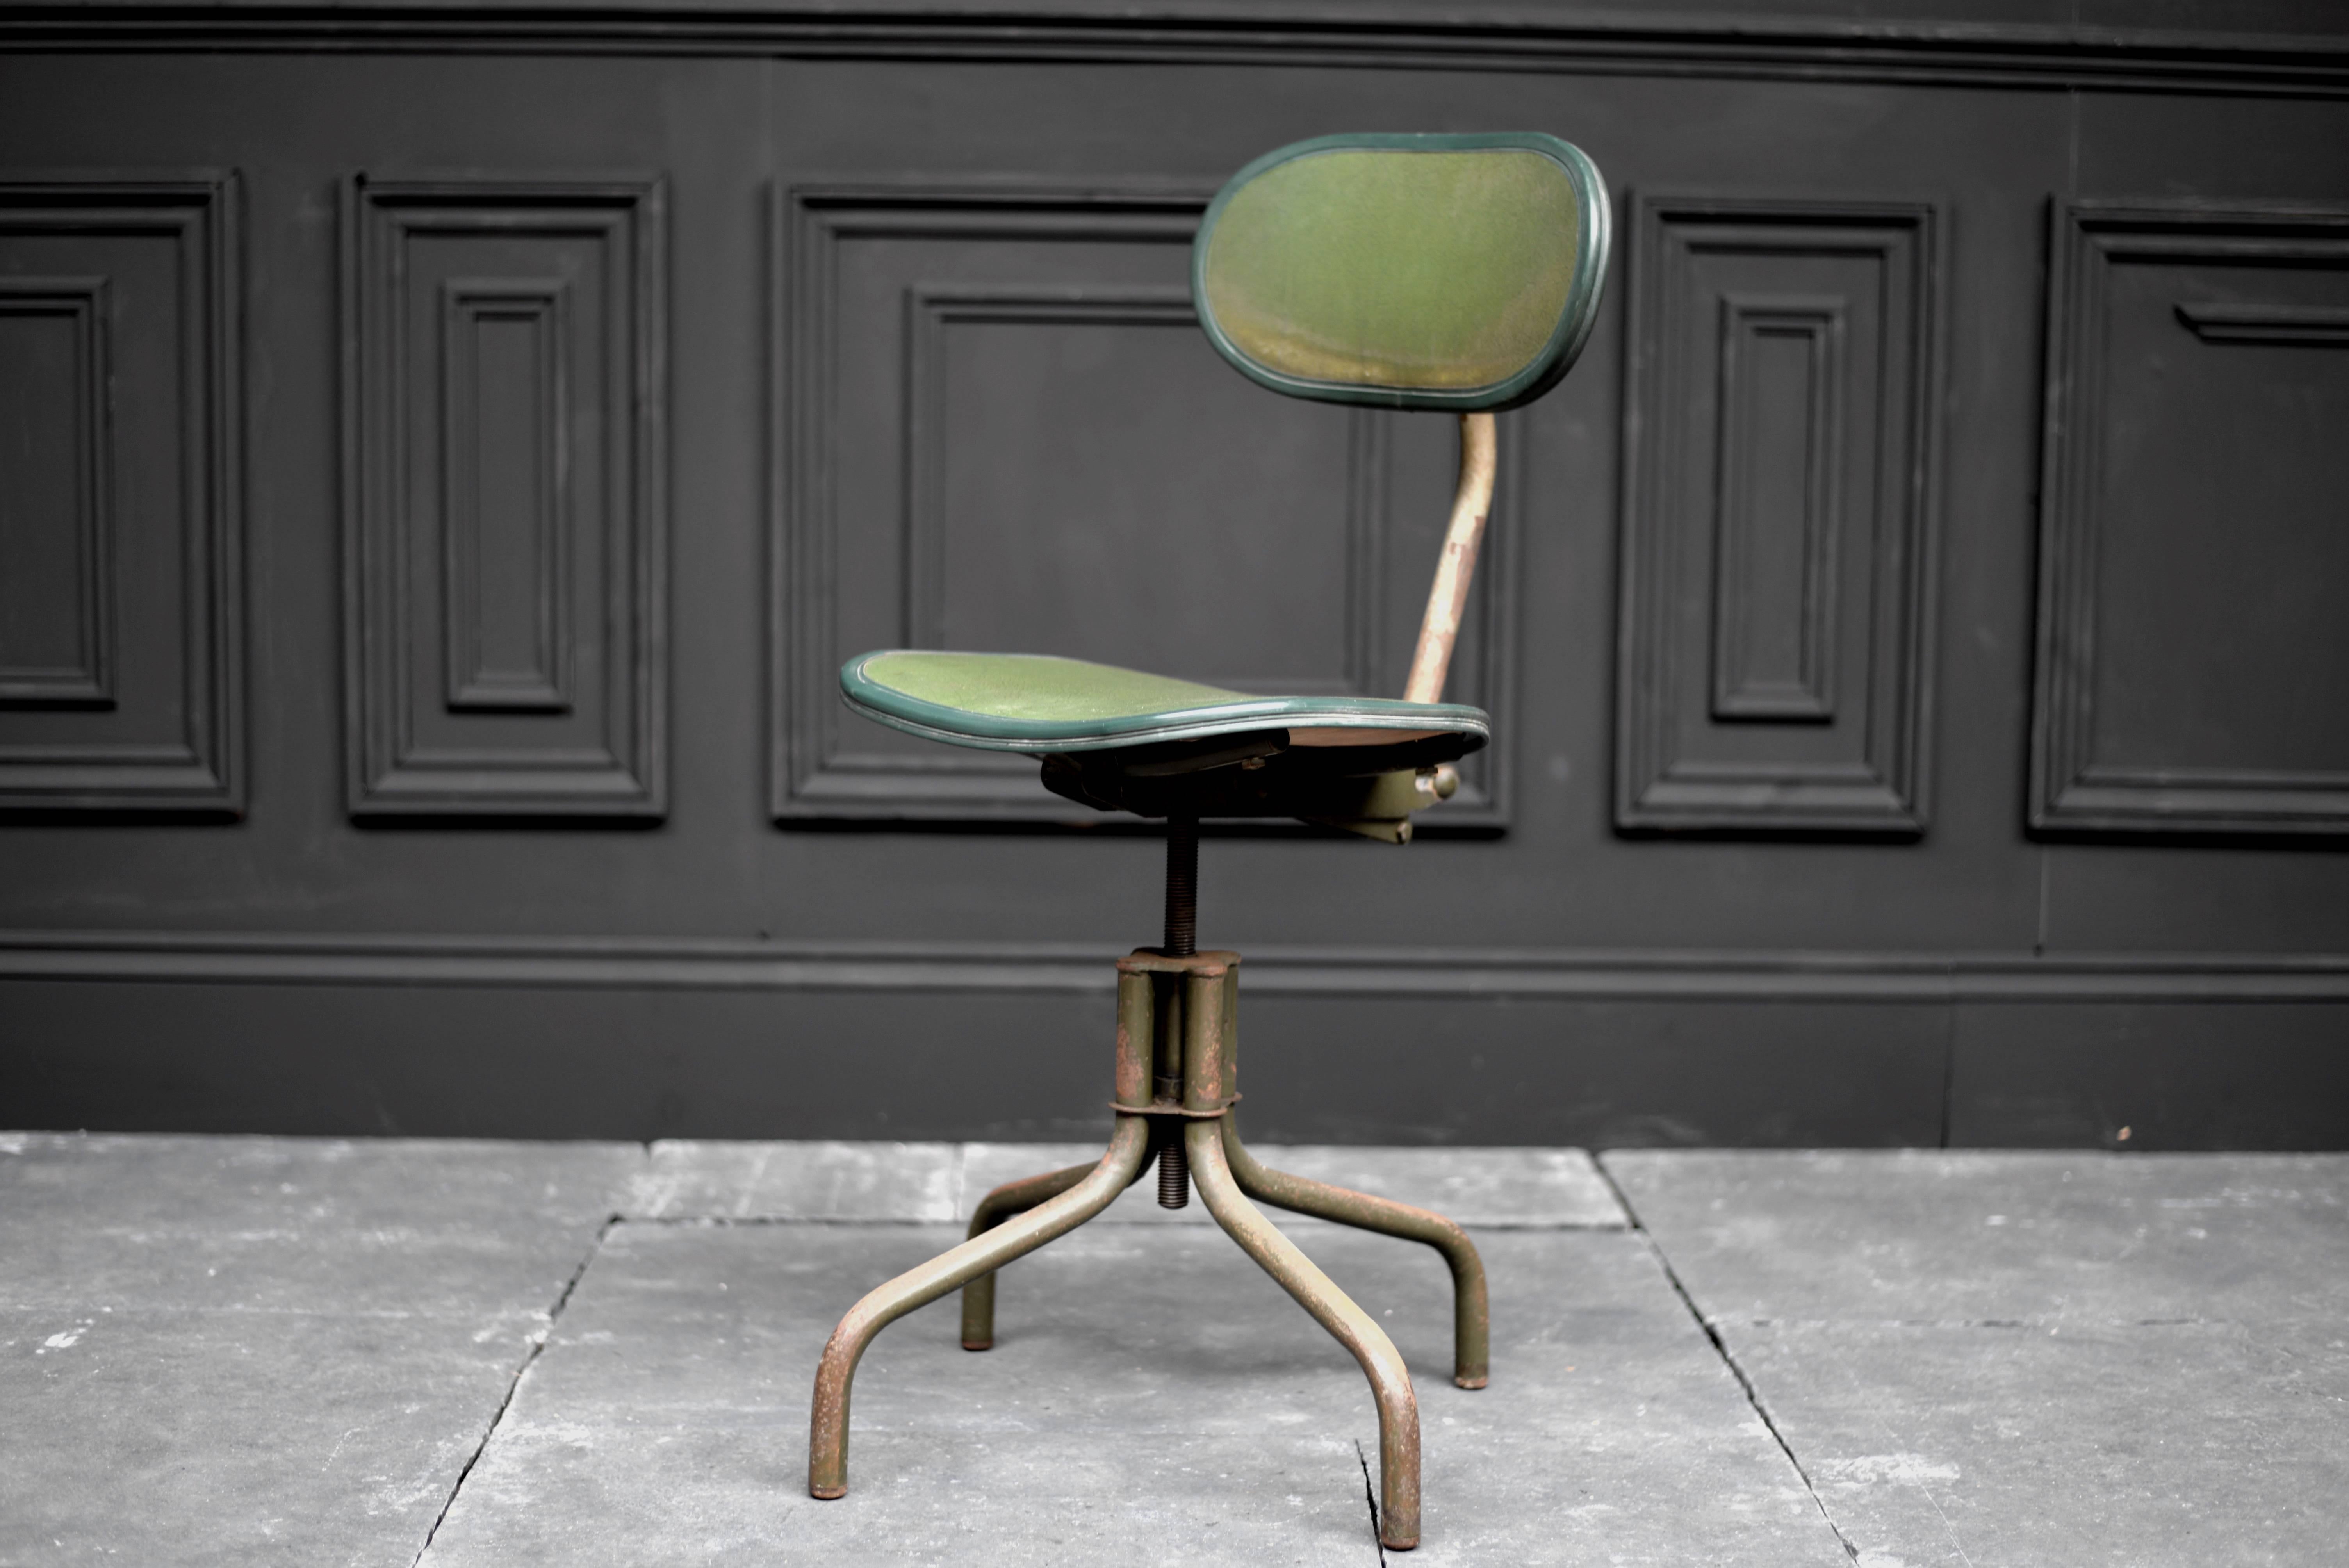 Early 20th century 'Metchair Production' green machinist chair with adjustable seat height from 16' to 23'.

Dimensions 
Max overall height 36'
Seat width 16'
Seat depth 14'.